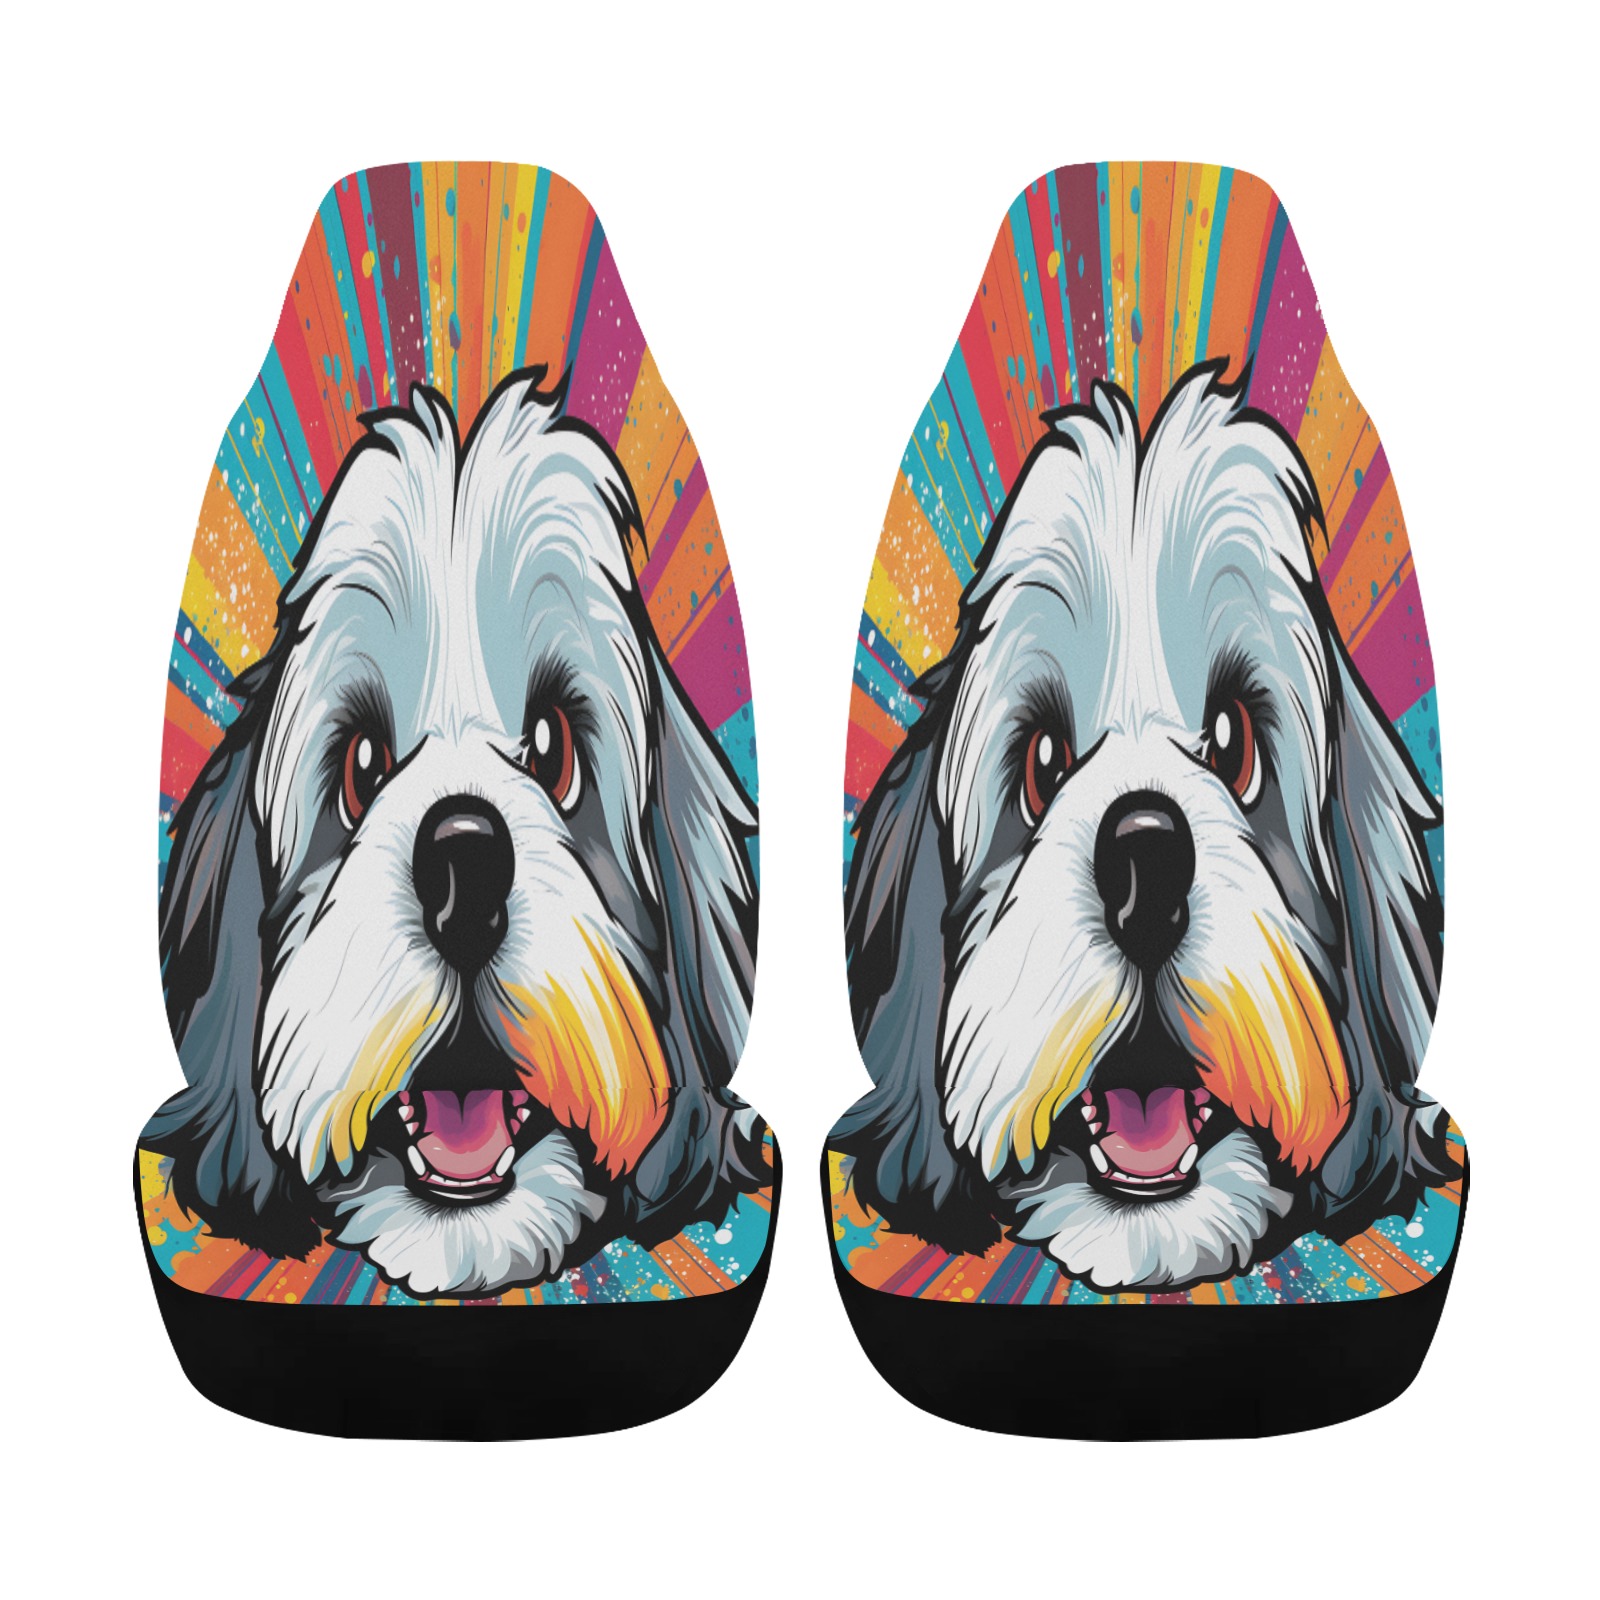 Lhasa Apso Pop Art Car Seat Cover Airbag Compatible (Set of 2)